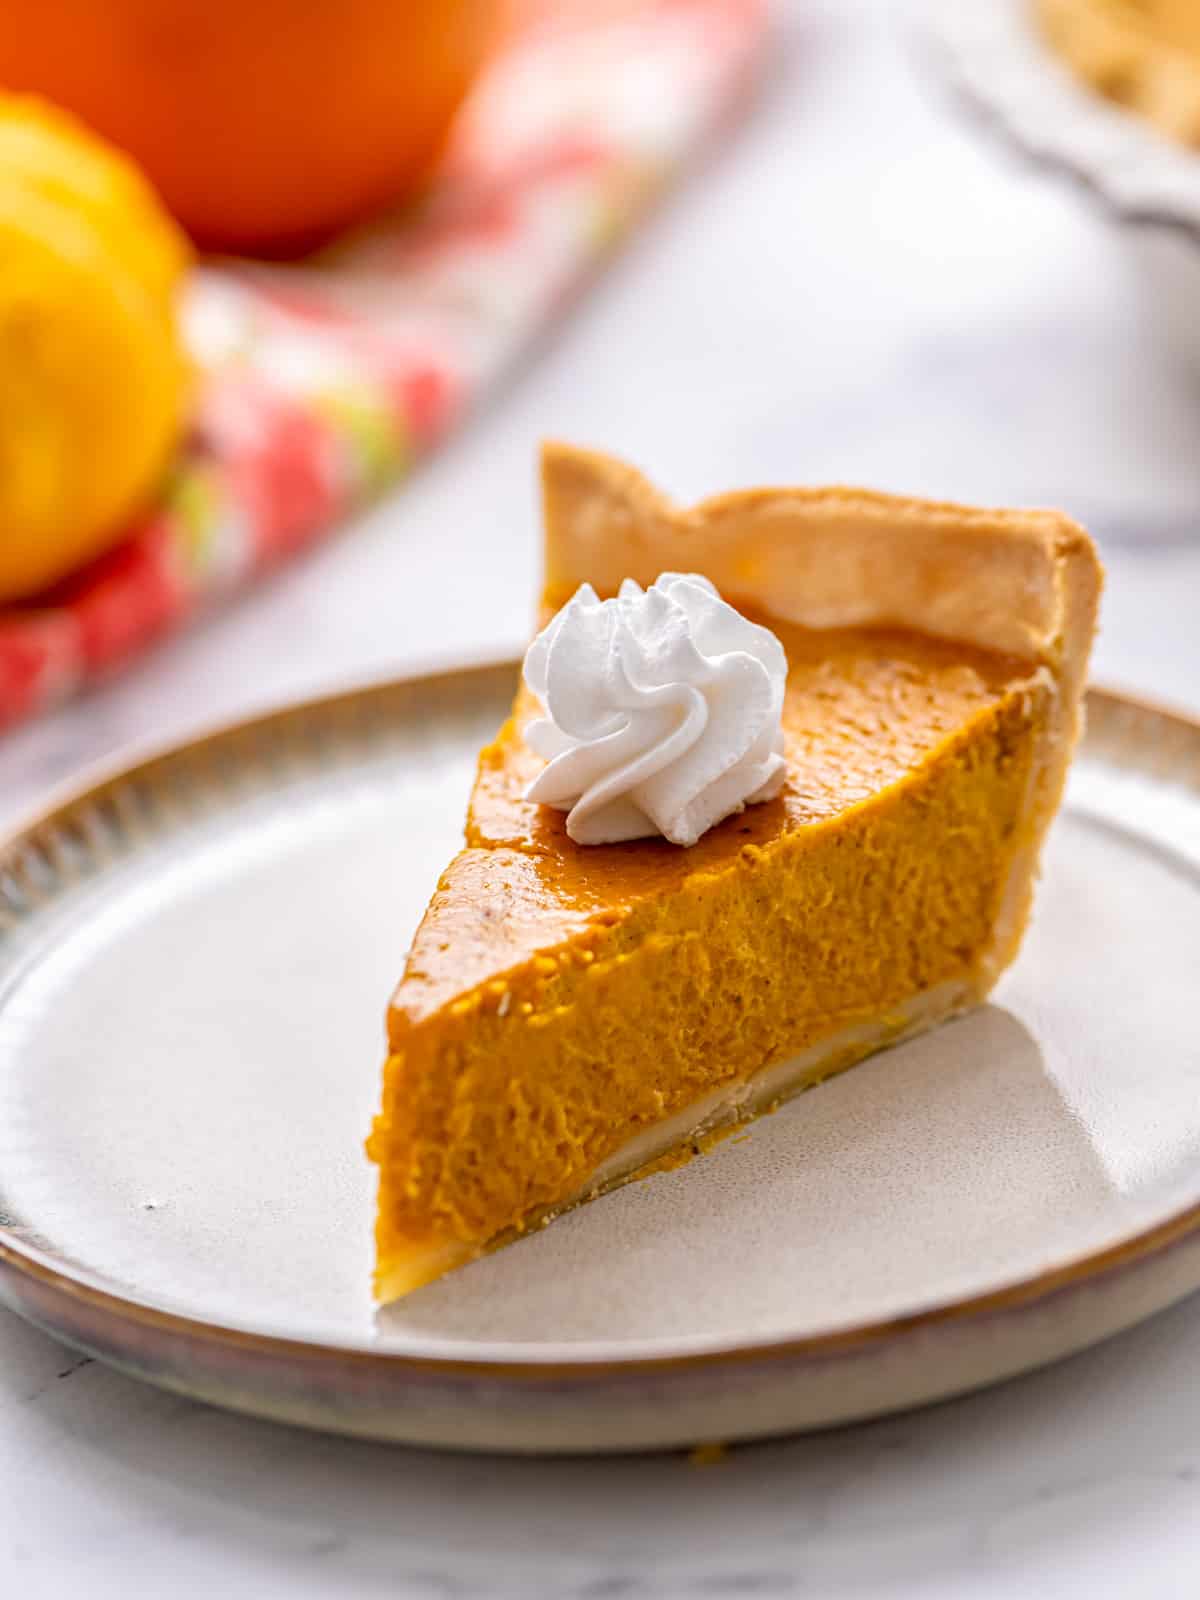 Slice of homemade pumpkin pie on white plate with whipped cream.